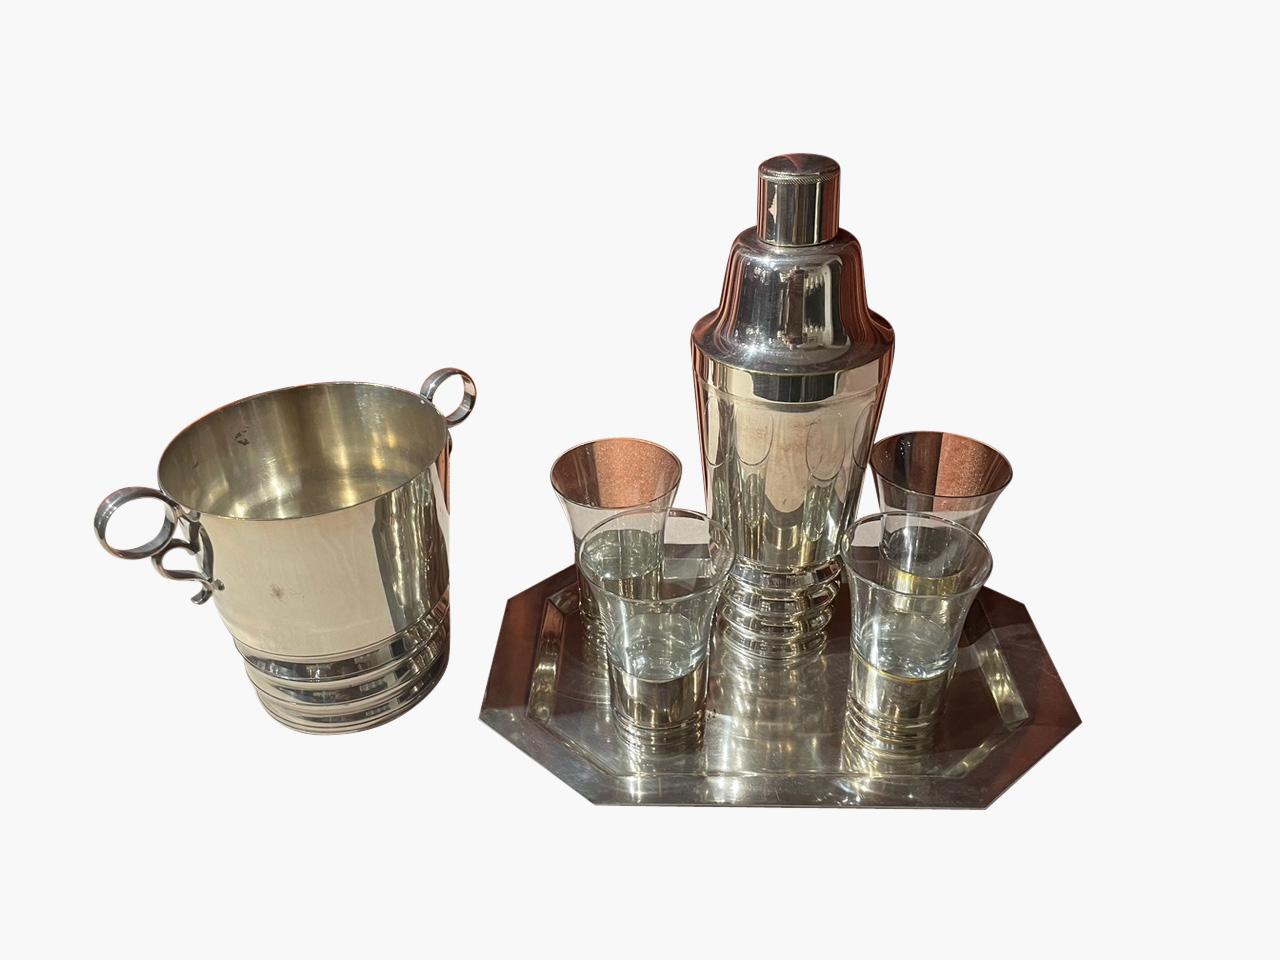 Art Deco cocktail shaker matching glasses and ice bucket silver plate. English Barware Art Deco set with strong horizontal lines in the base of all pieces. 4 Perfect glasses, each one sitting in its own matching metal base. 7 Piece set in total and